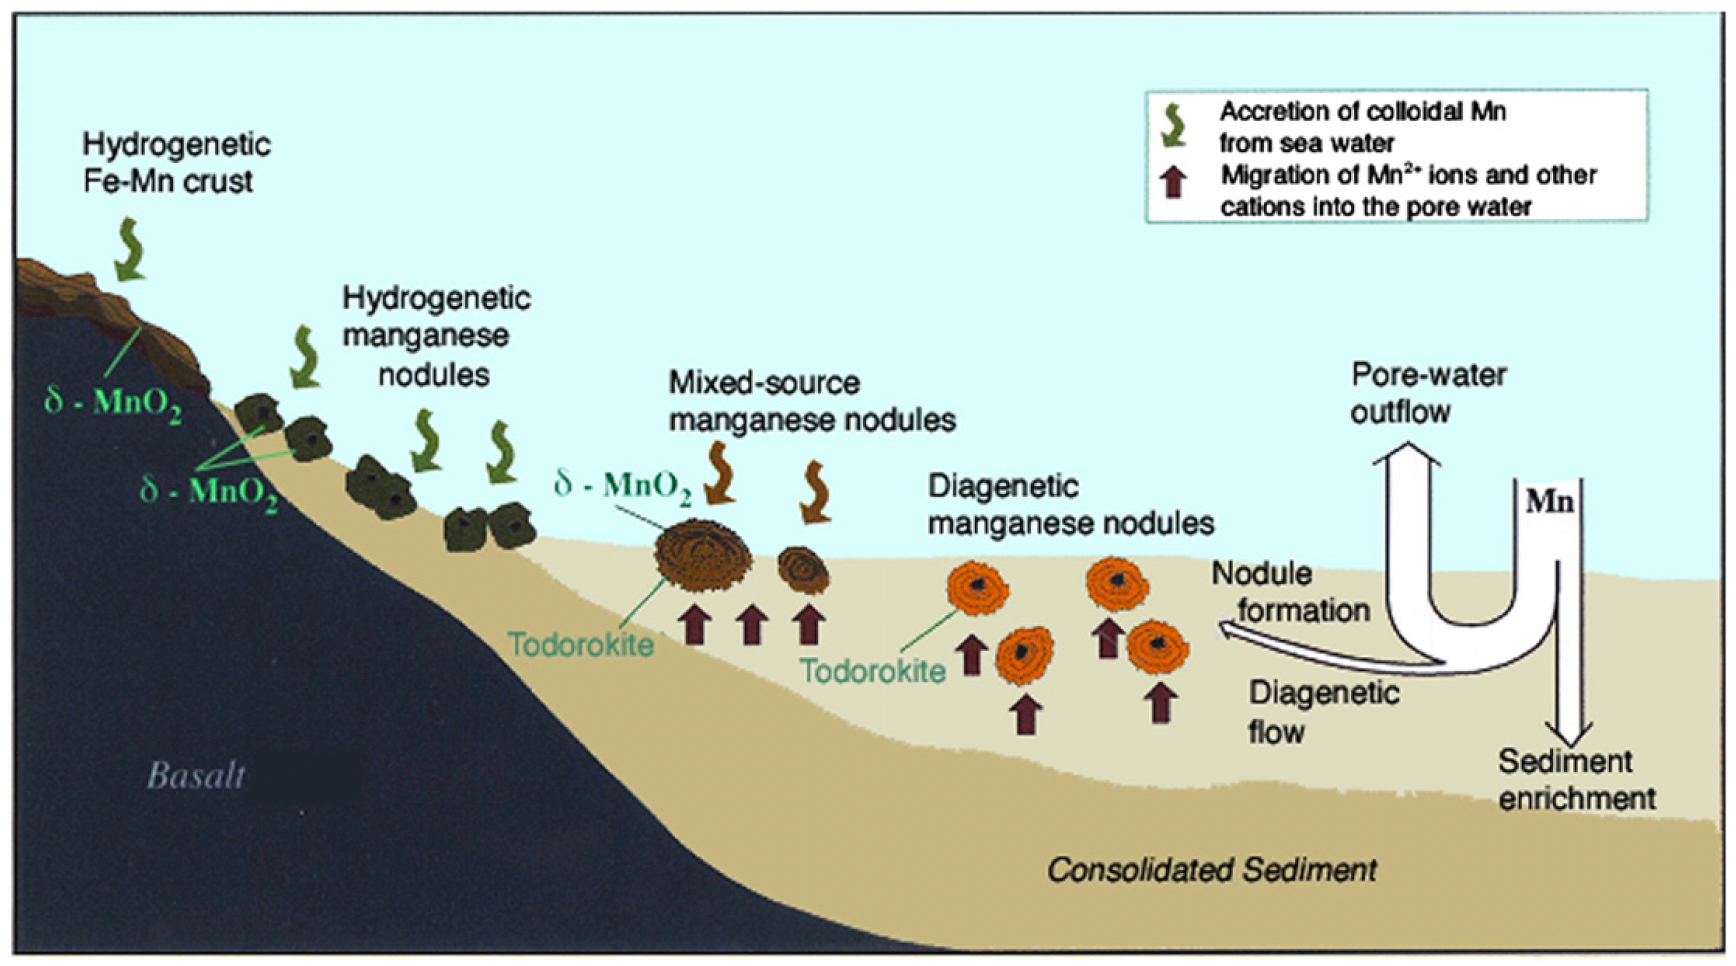 A diagram of the various means by which subsea polymetallic nodules form